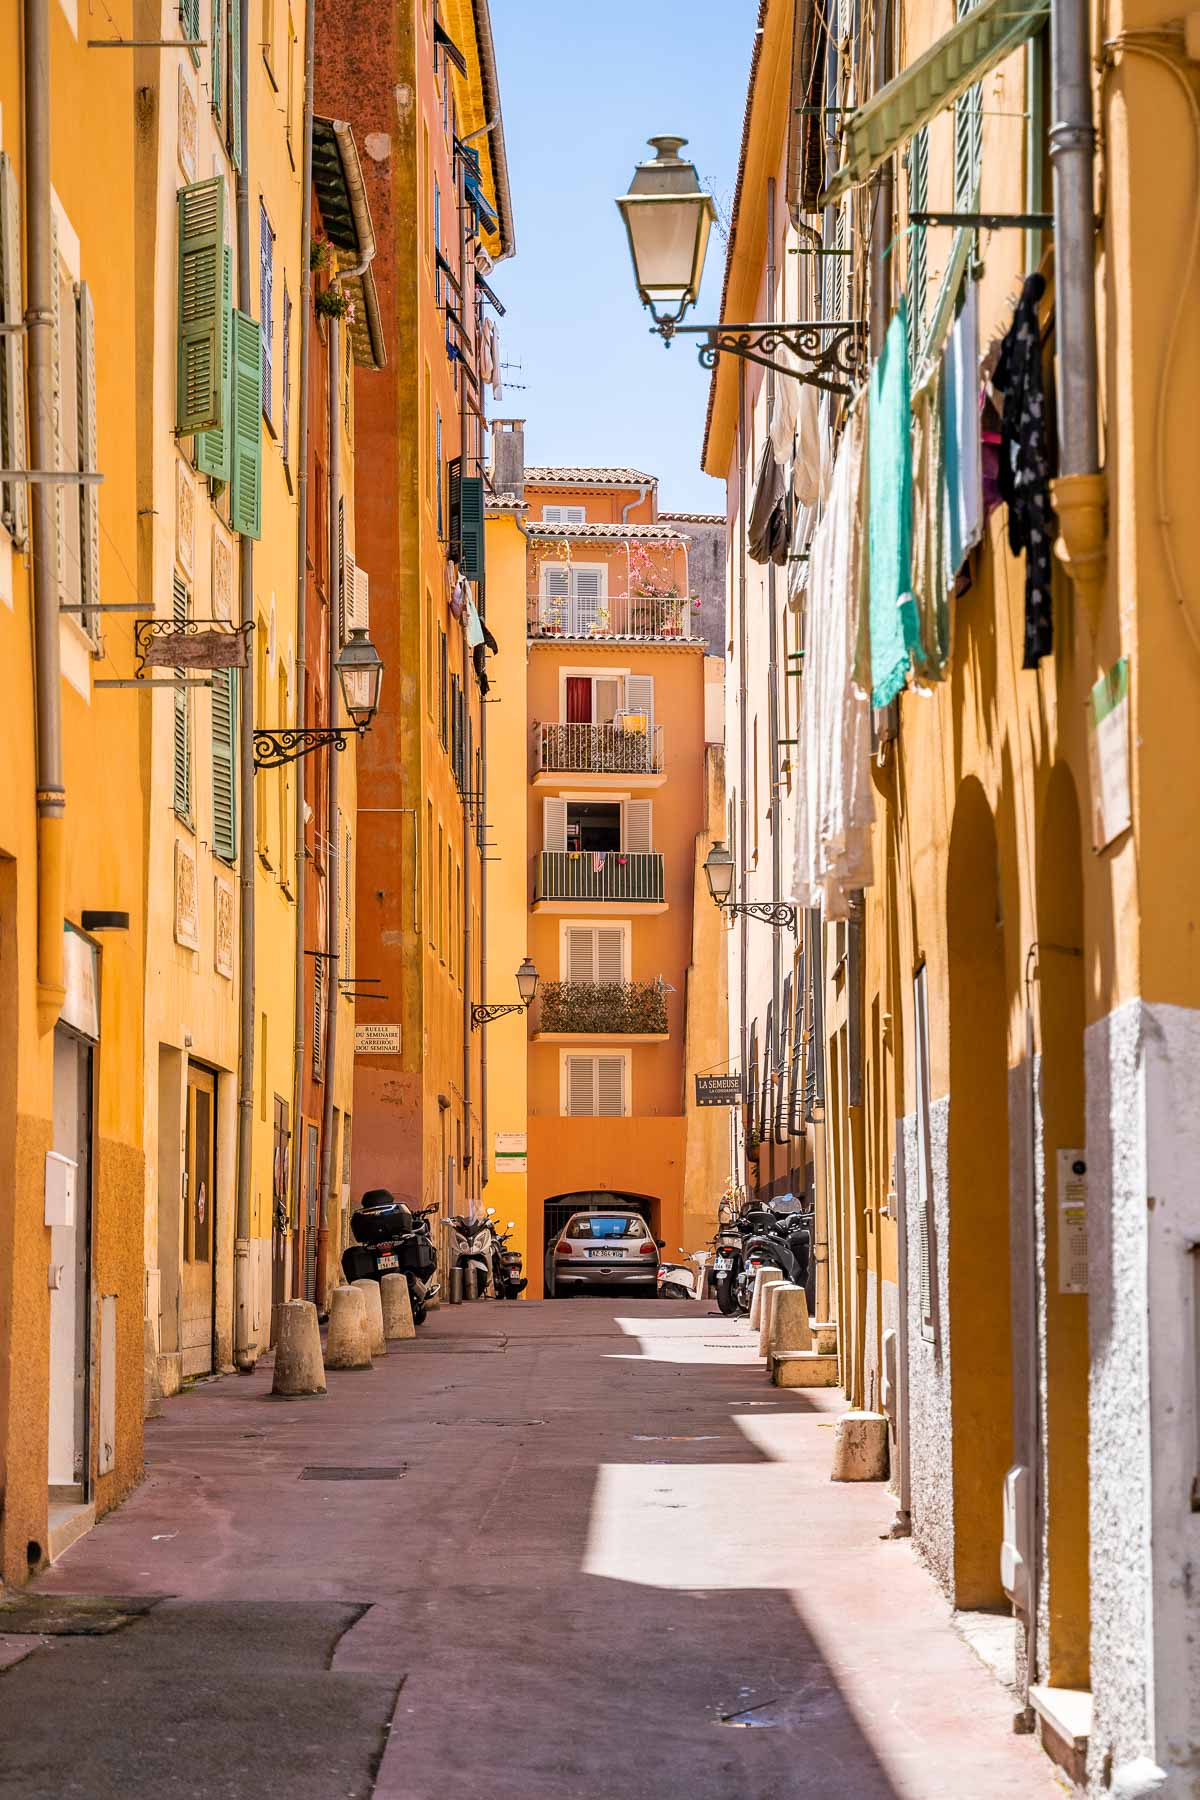 Colorful buildings in the Old Town of Nice, France